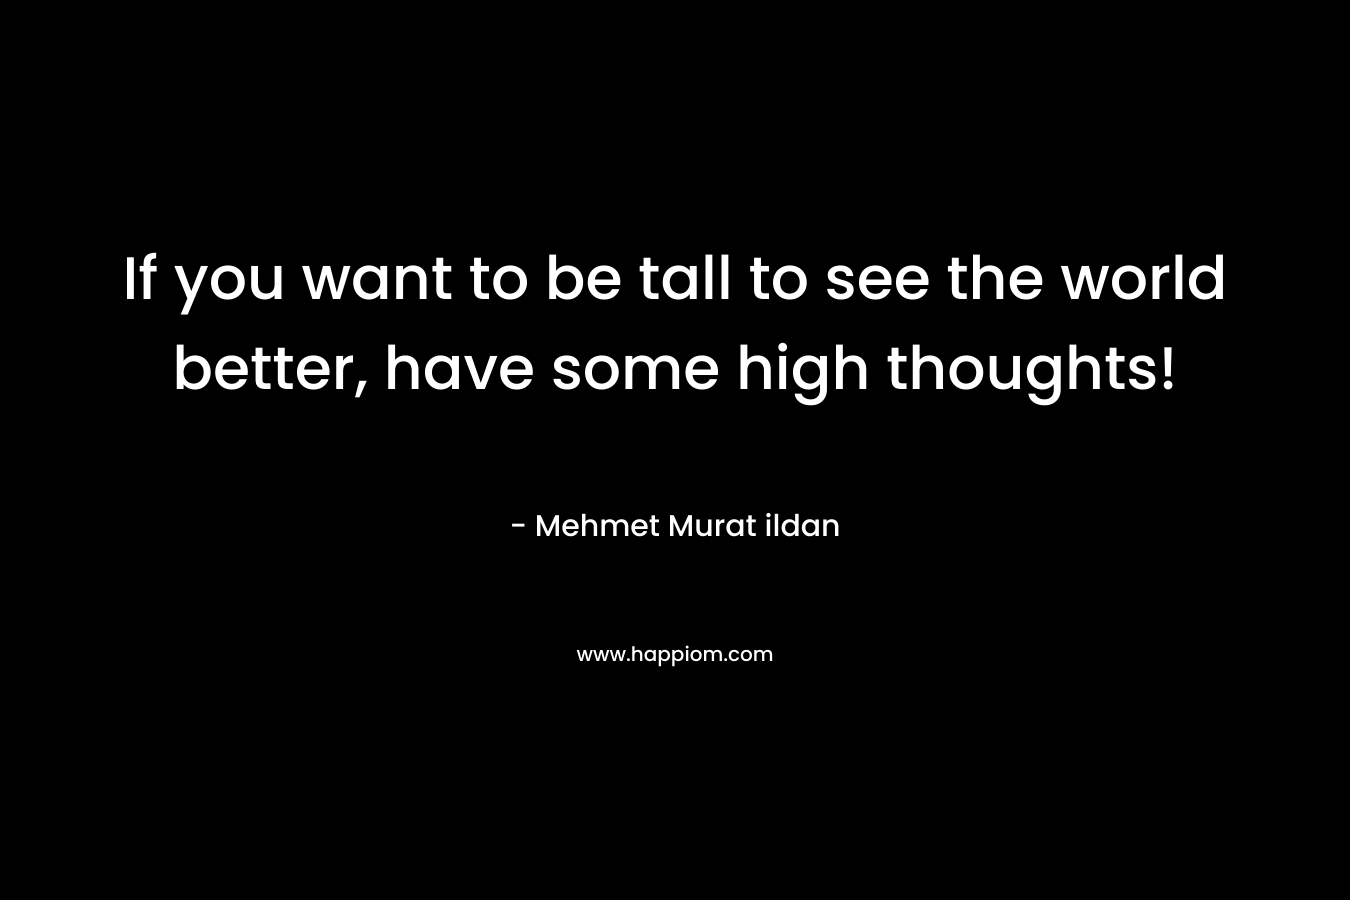 If you want to be tall to see the world better, have some high thoughts!